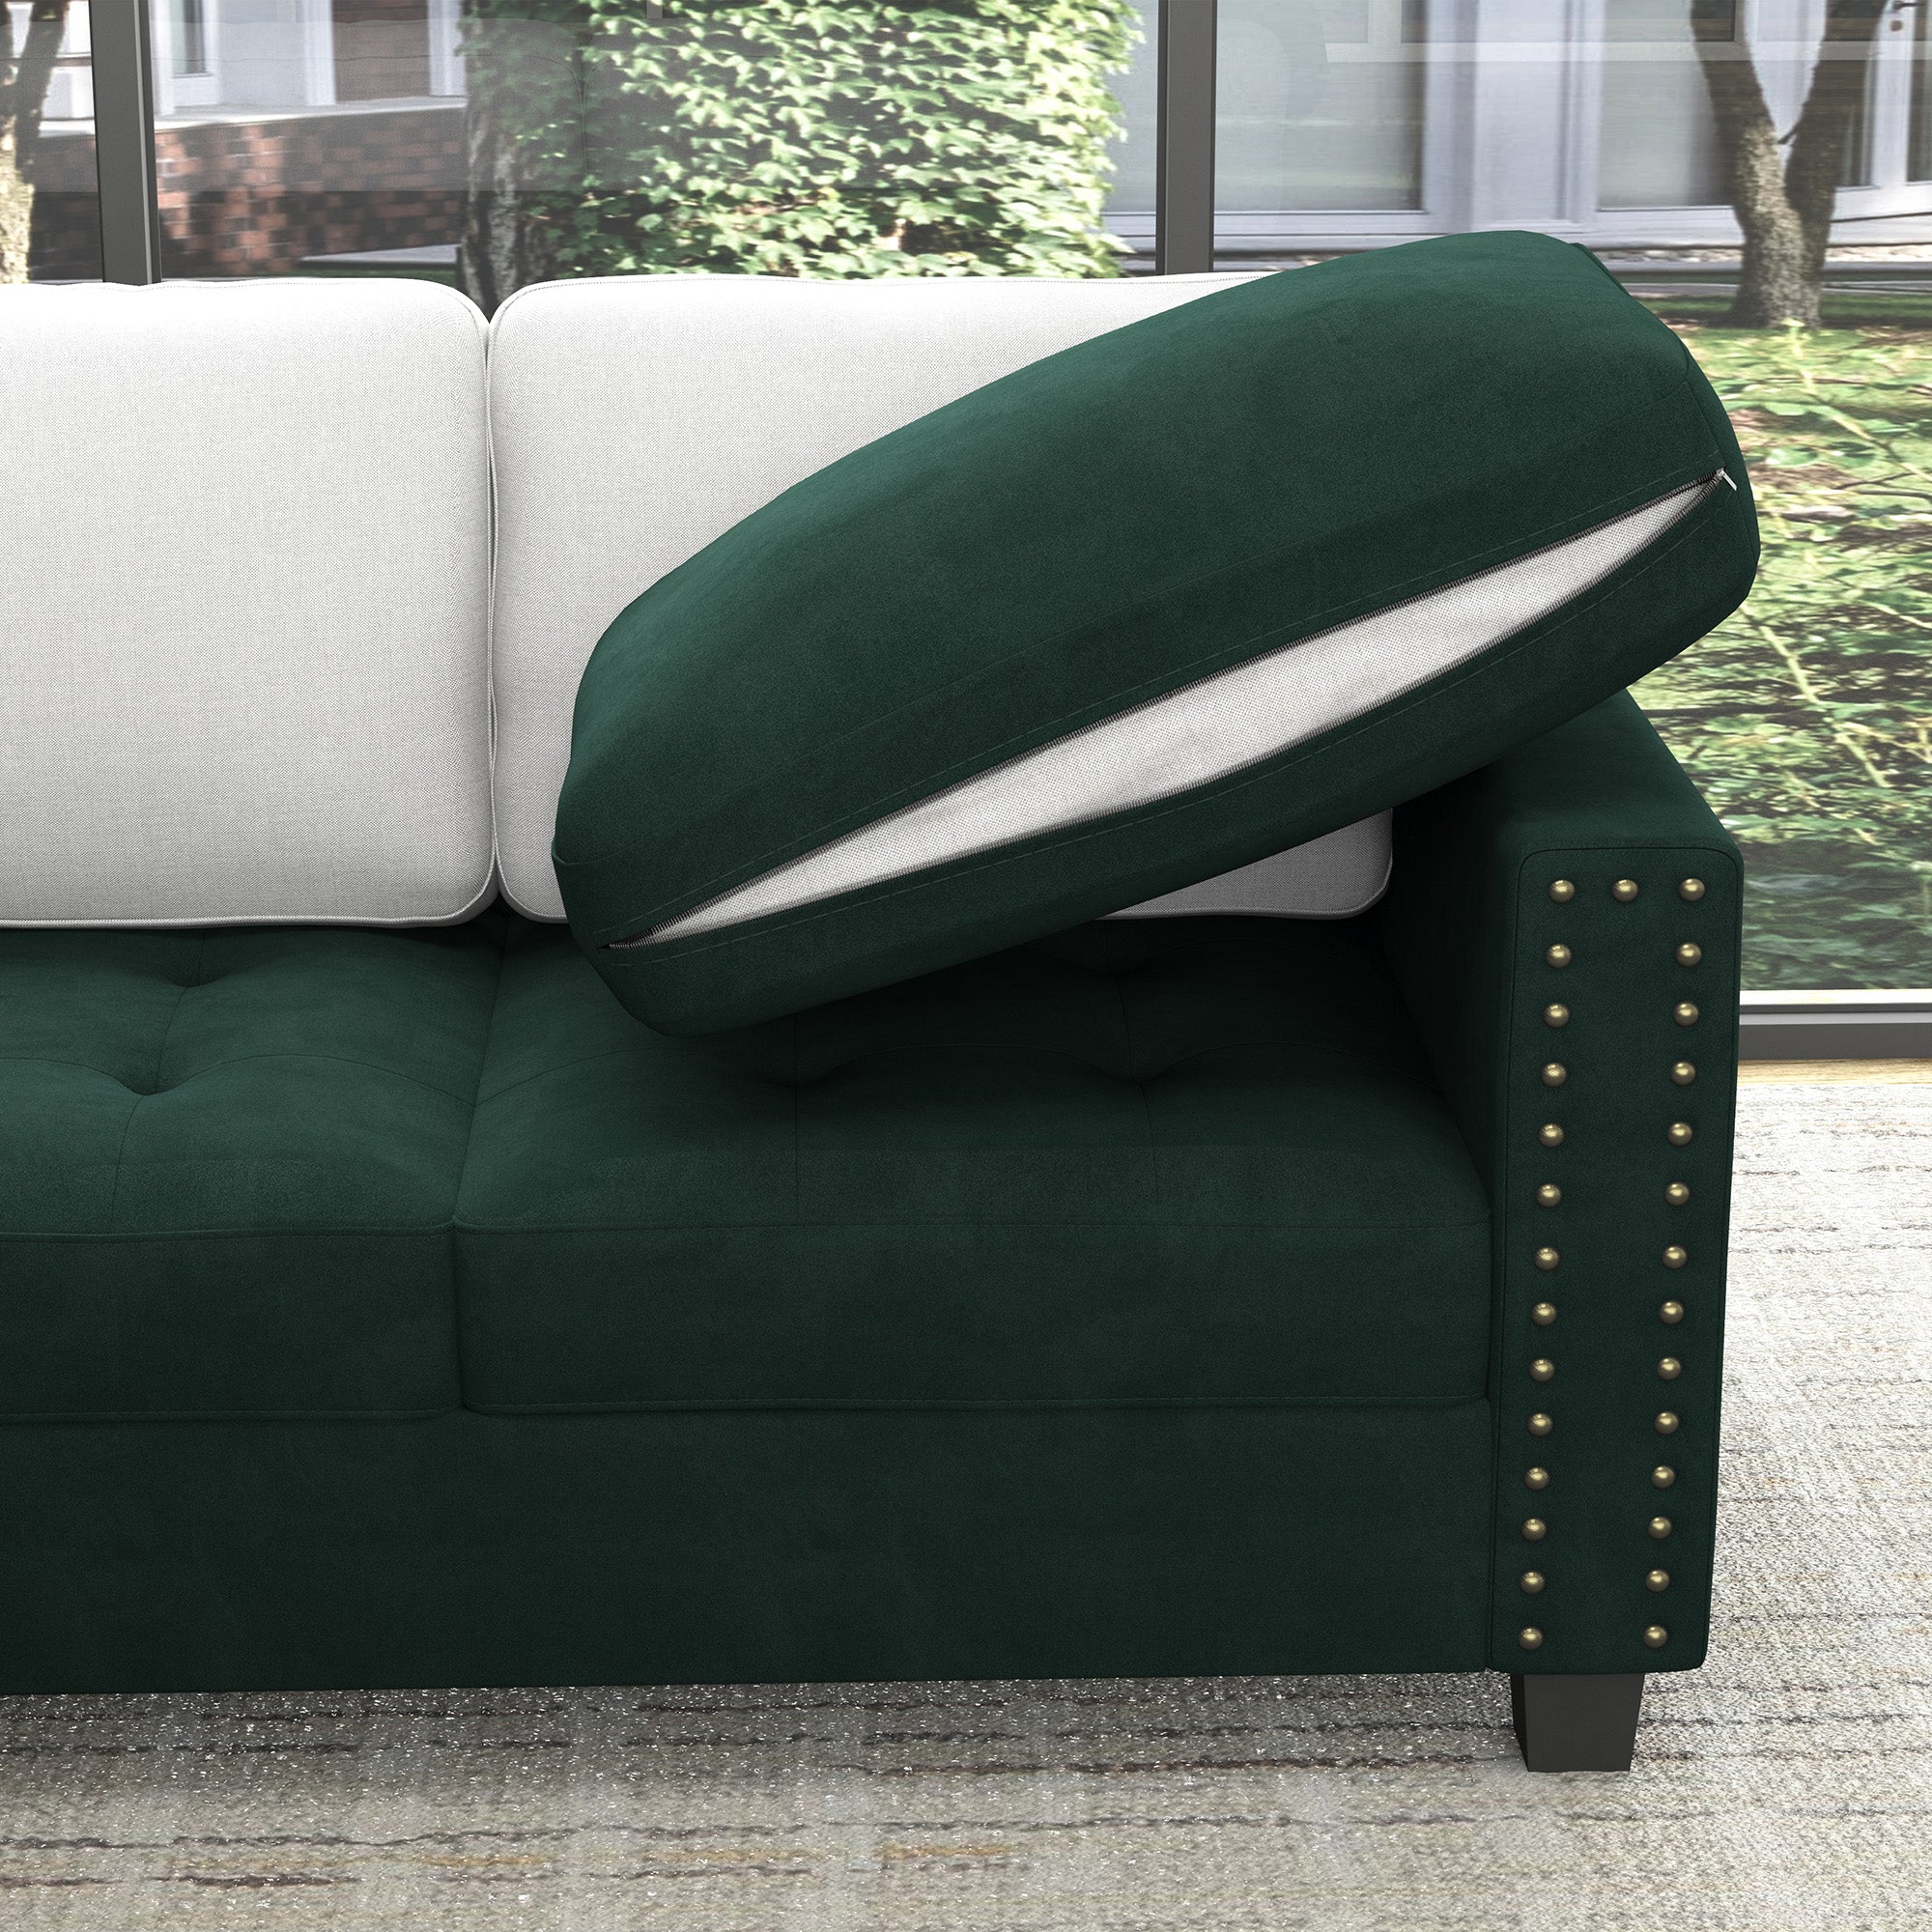 HONBAY Wraparound Modular Sofa 12-Seat With 1-Storage Space+1-Left Arm+1-Right Arm #Color_Green